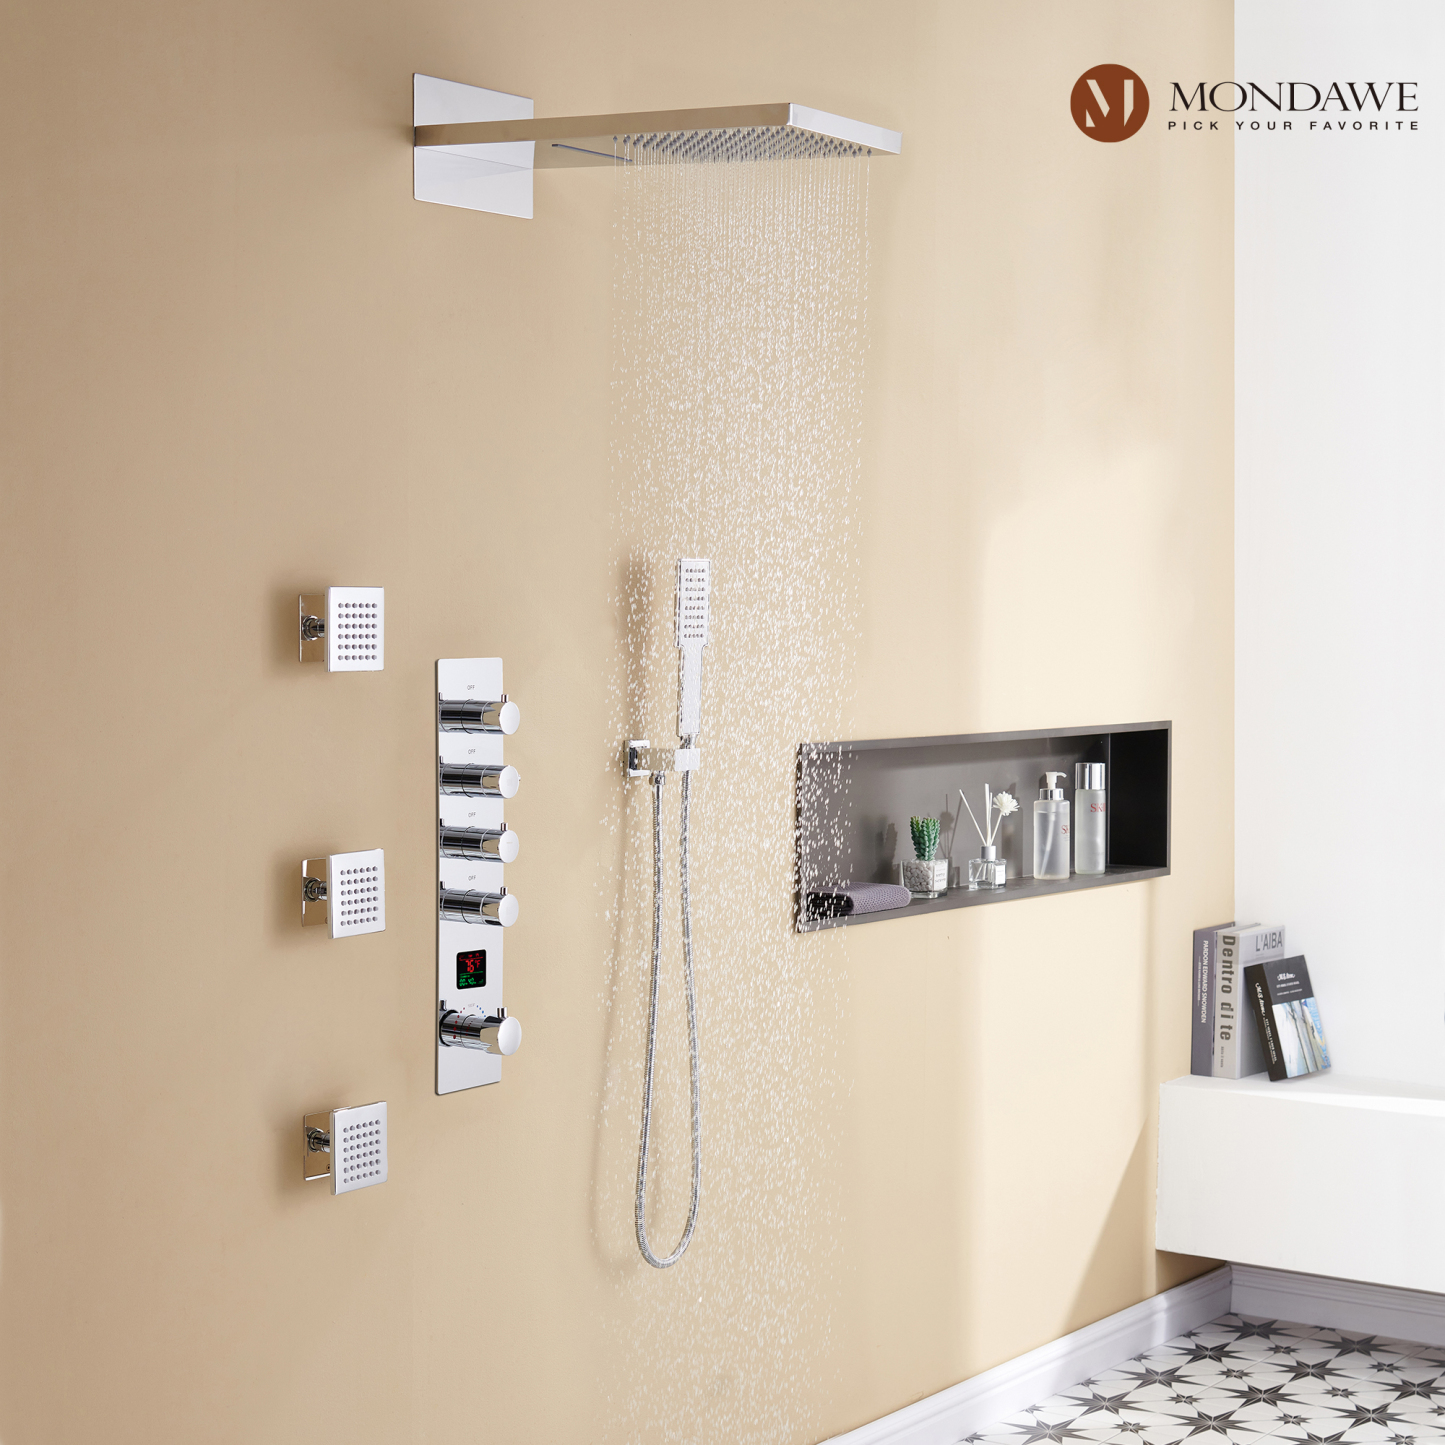 22 in. with Digital Temperature Display Luxury Rainfall Shower Heads Wall Mounted